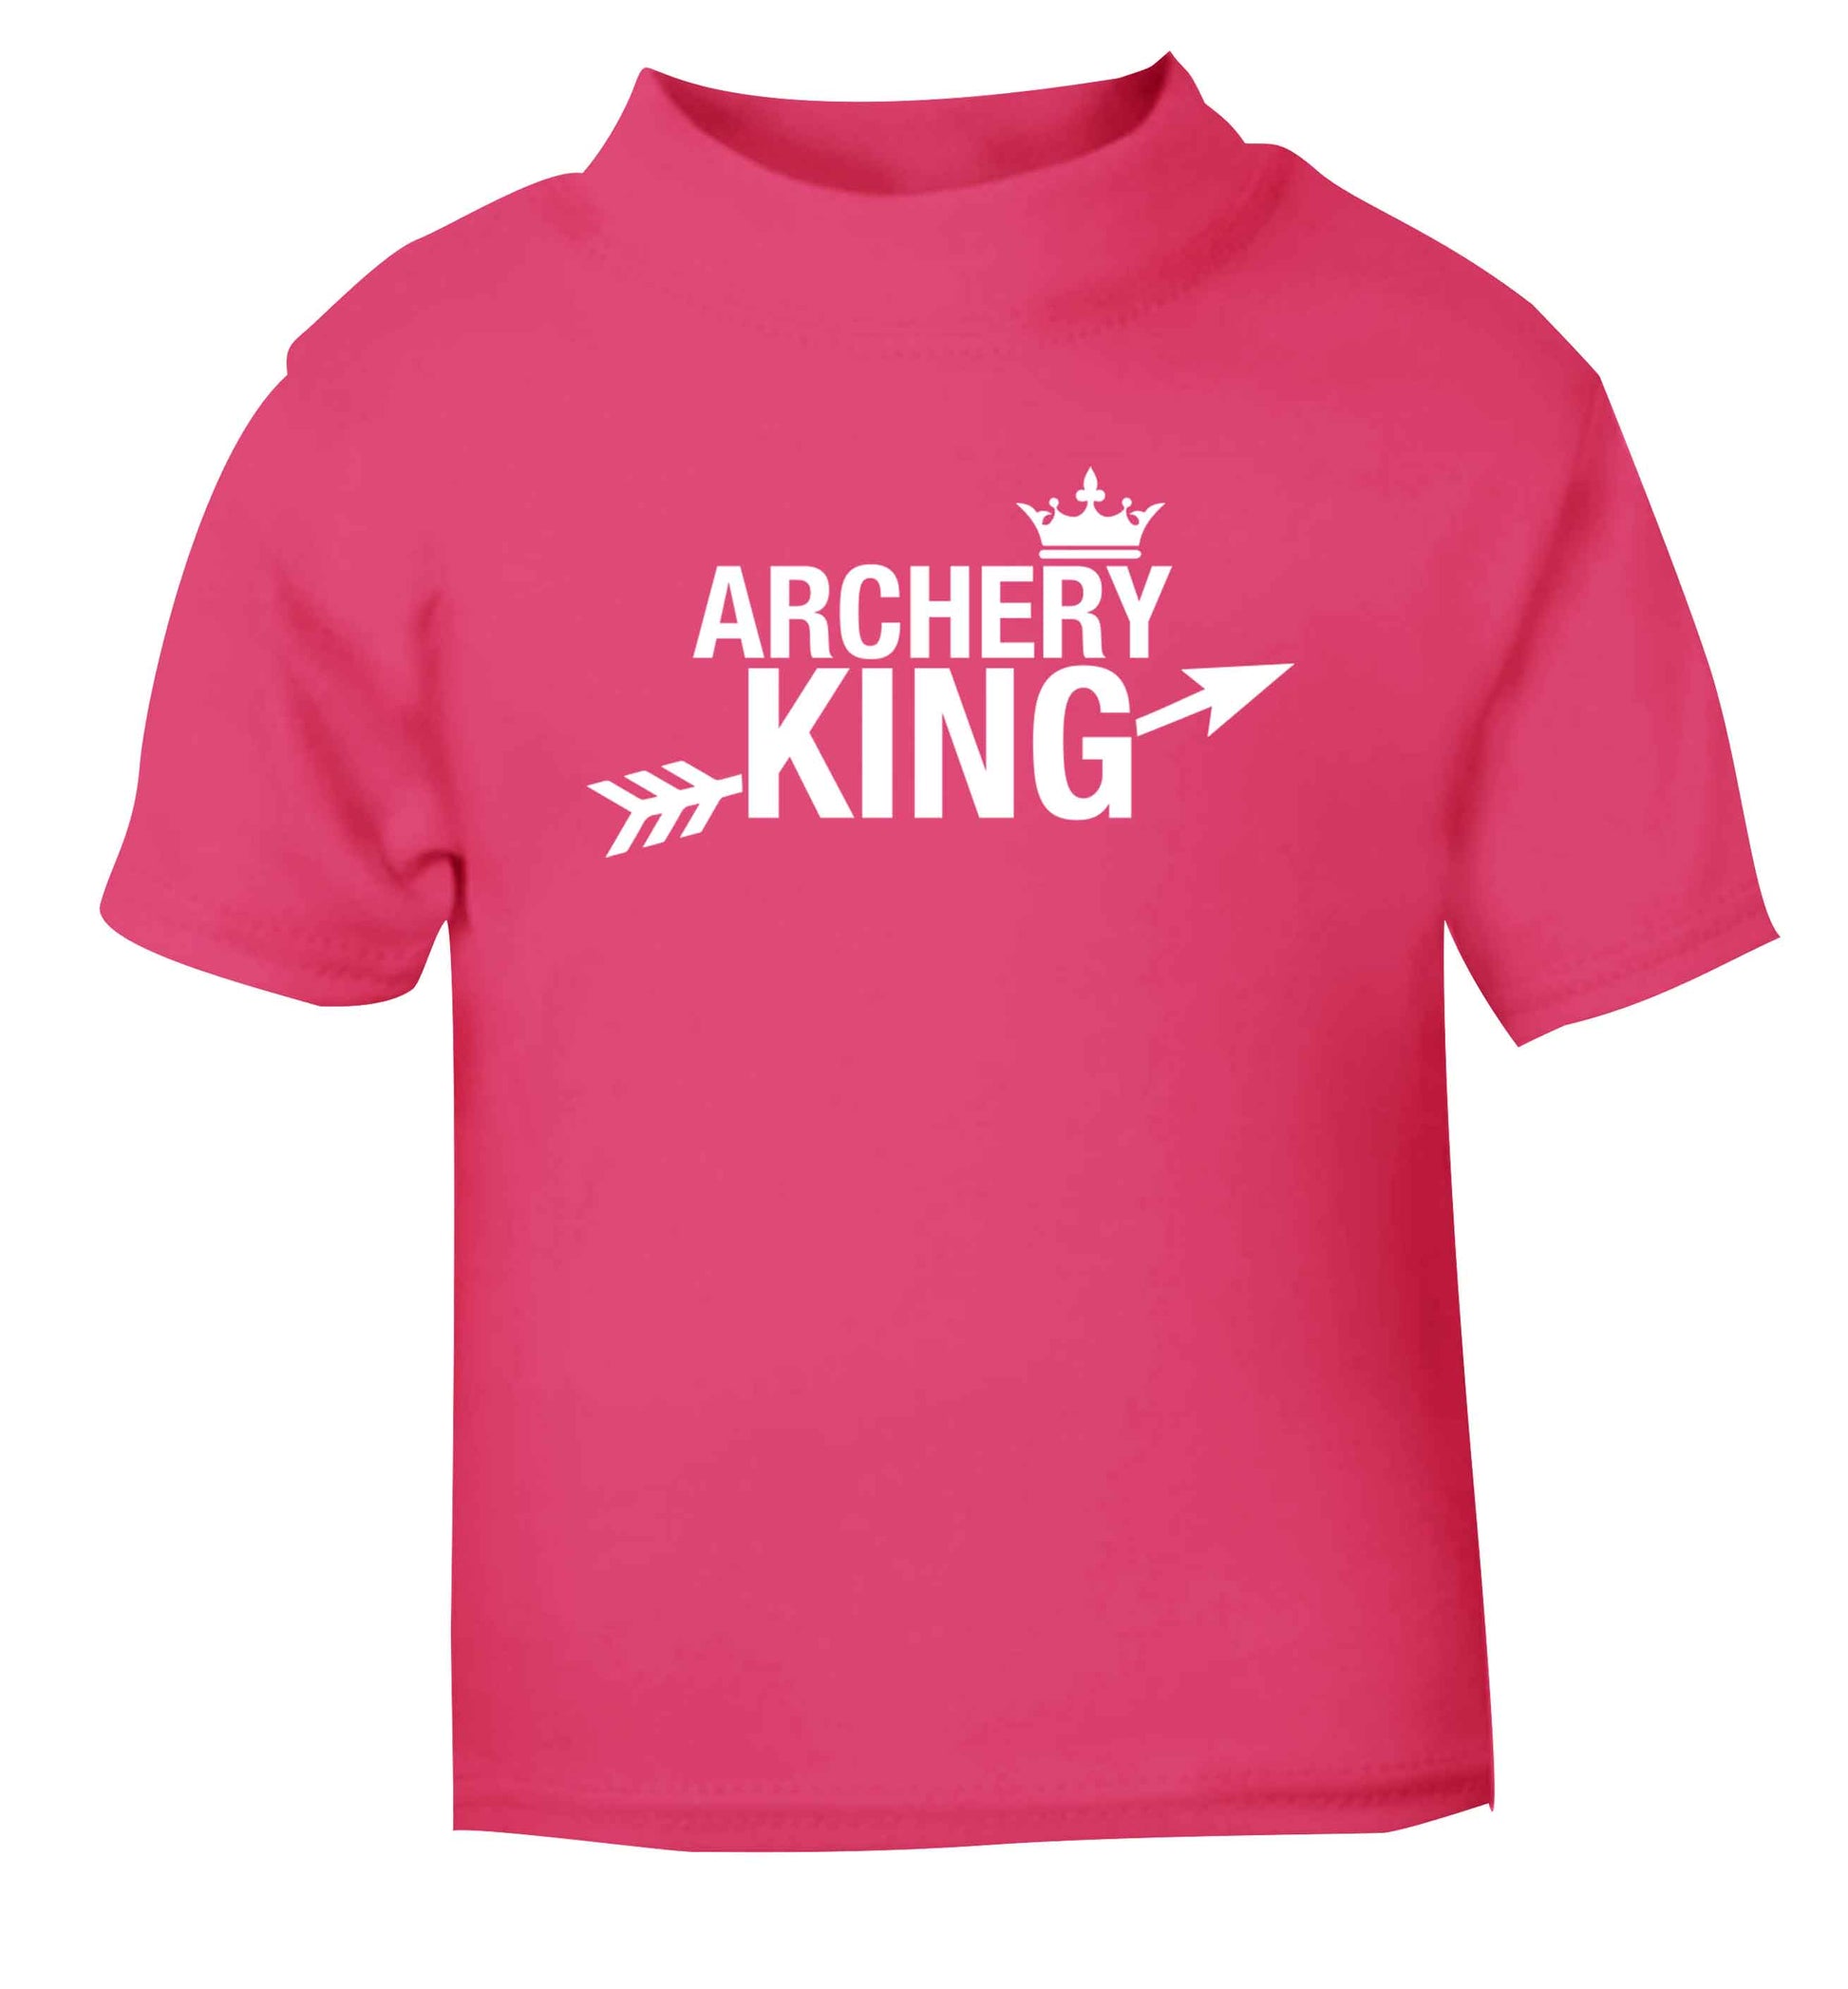 Archery king pink Baby Toddler Tshirt 2 Years